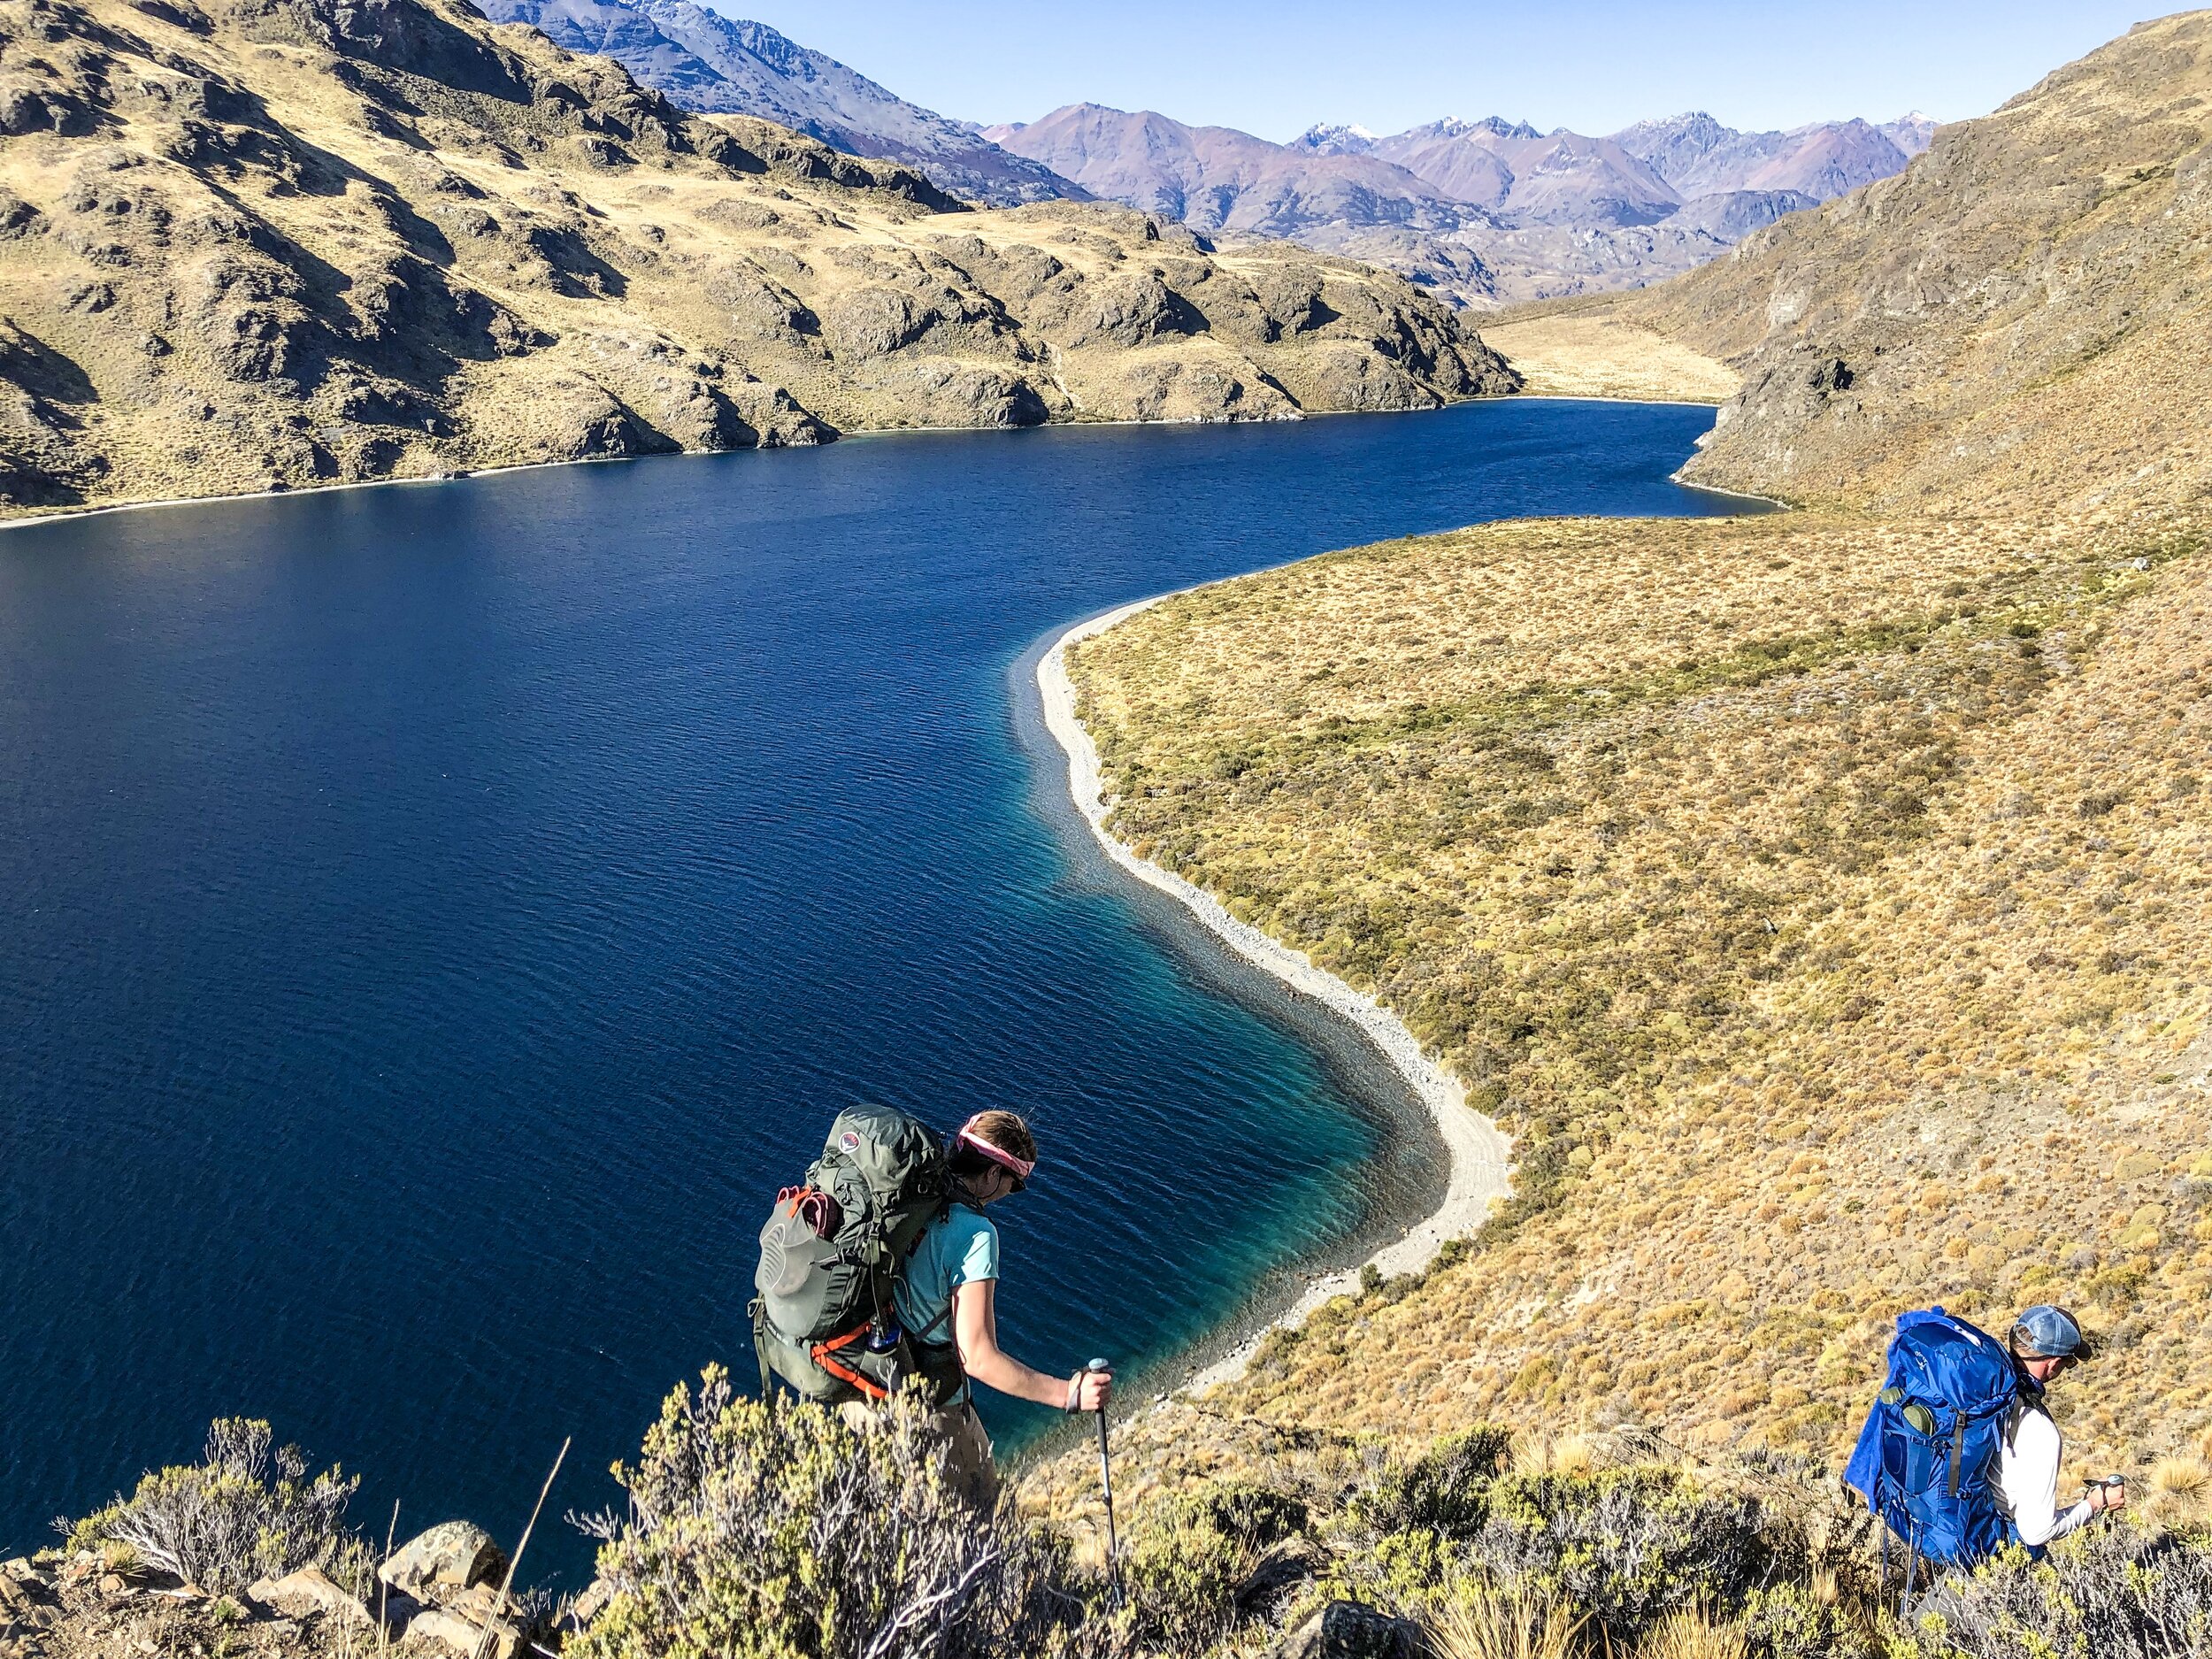 Full Patagonia NP Traverse: the longer route gives the chance to see spectacular high lakes like this one